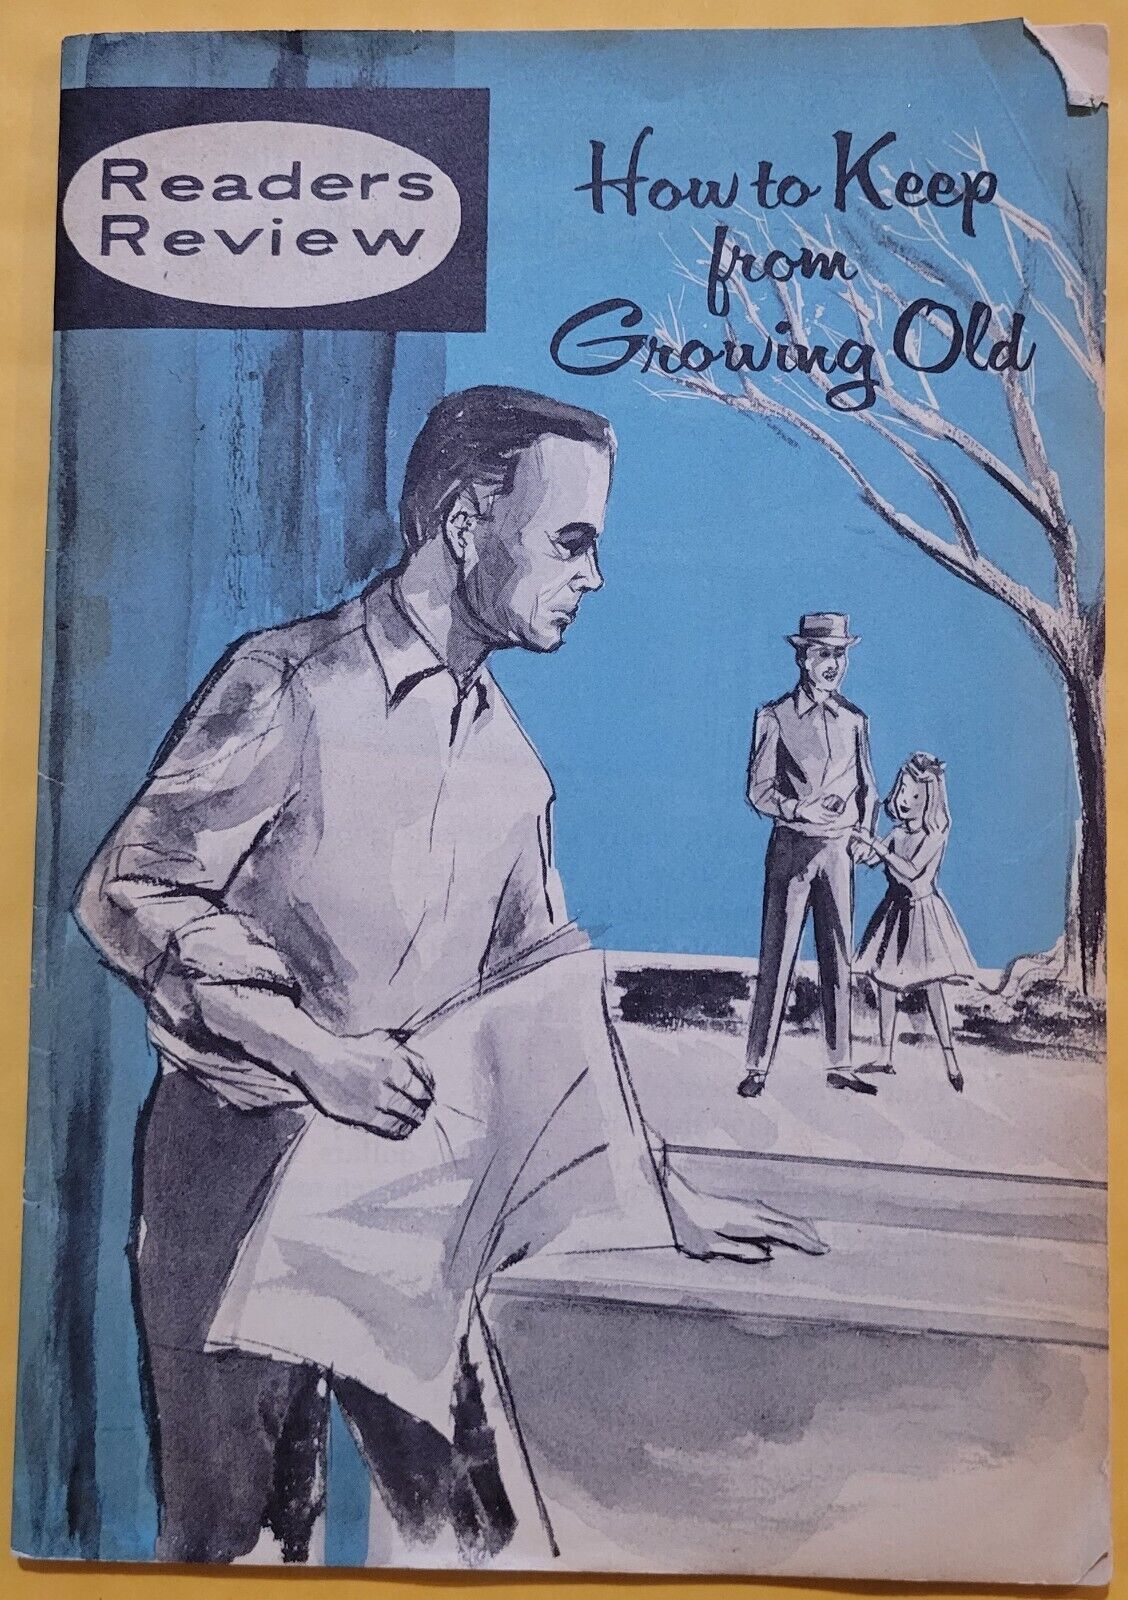 Vintage Booklet - How to Keep from Growing Old - Readers Review - 1950s / 1960s